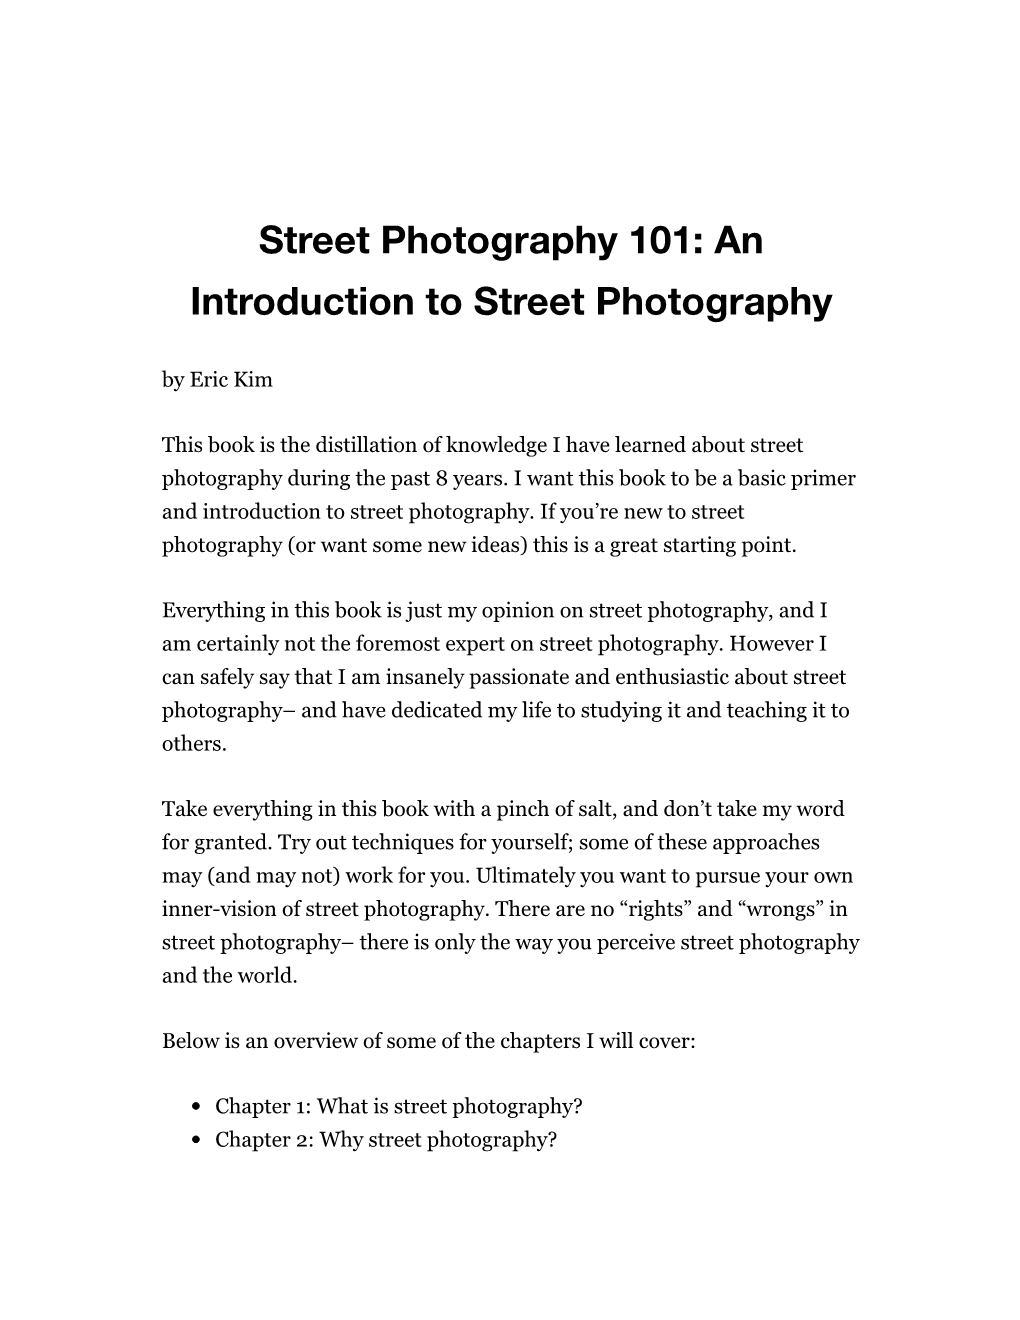 Street Photography 101: an Introduction to Street Photography by Eric Kim